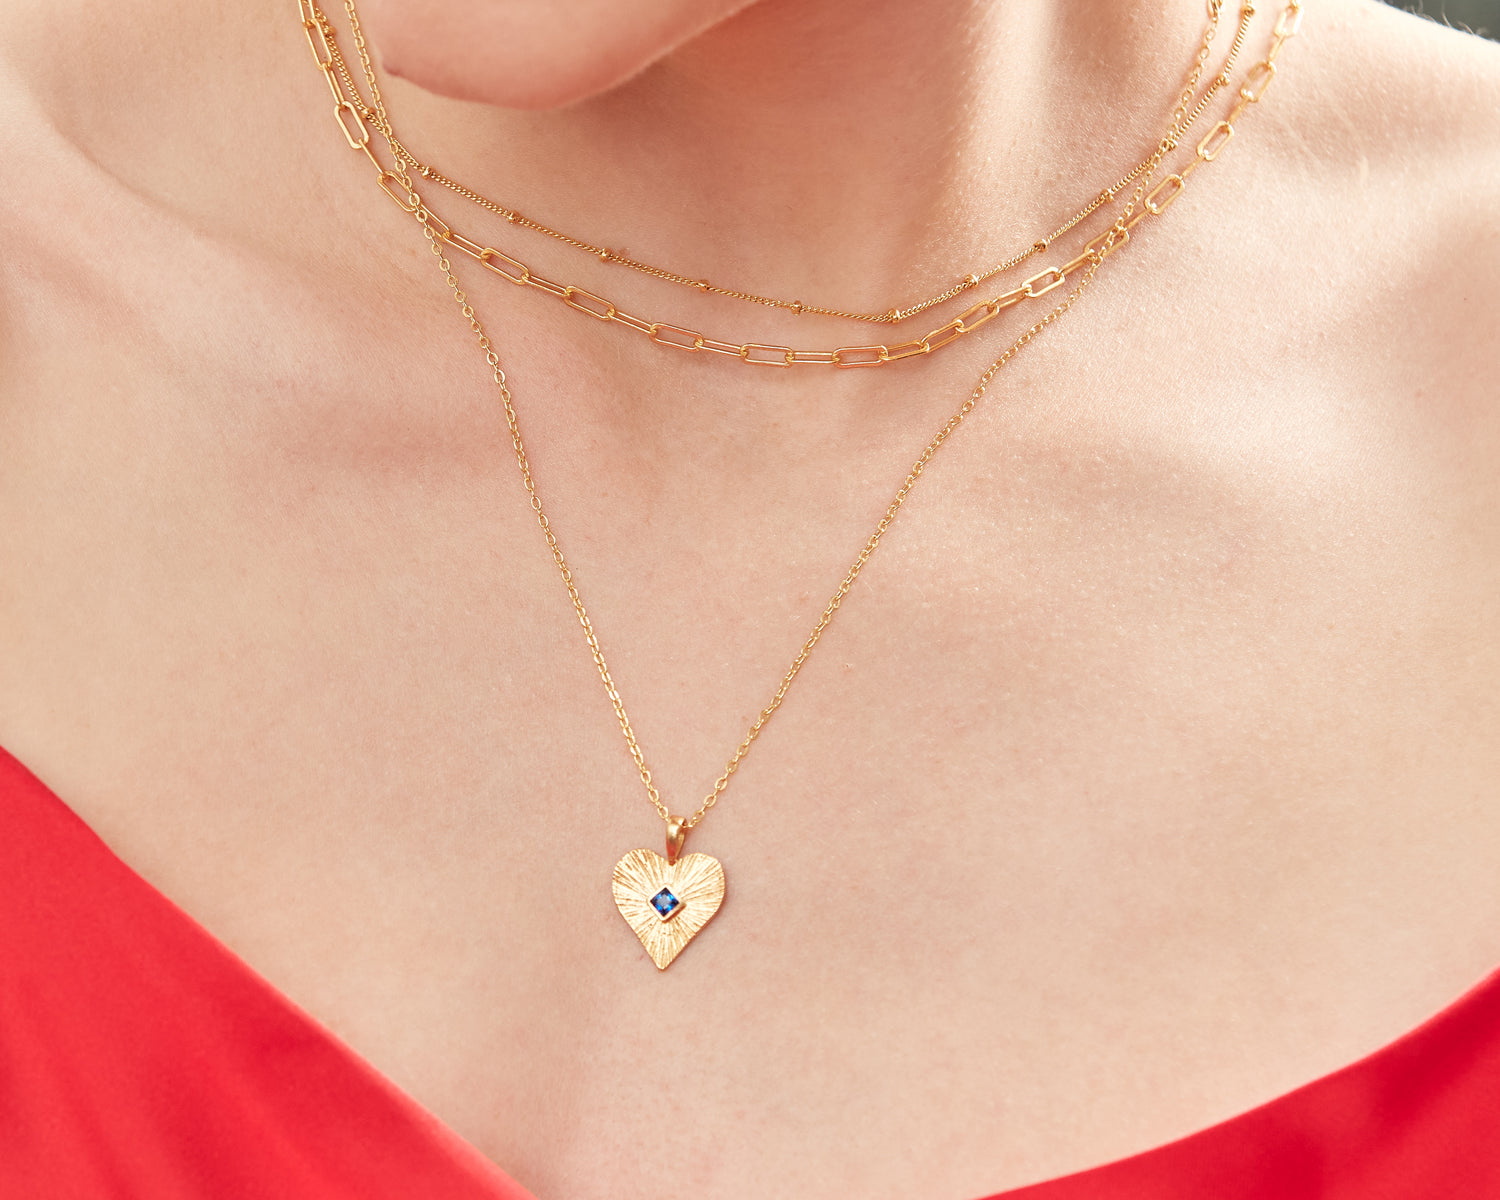 Golden Heart Pendant Necklace with Blue Crystal | Sustainable Jewellery by Ottoman Hands